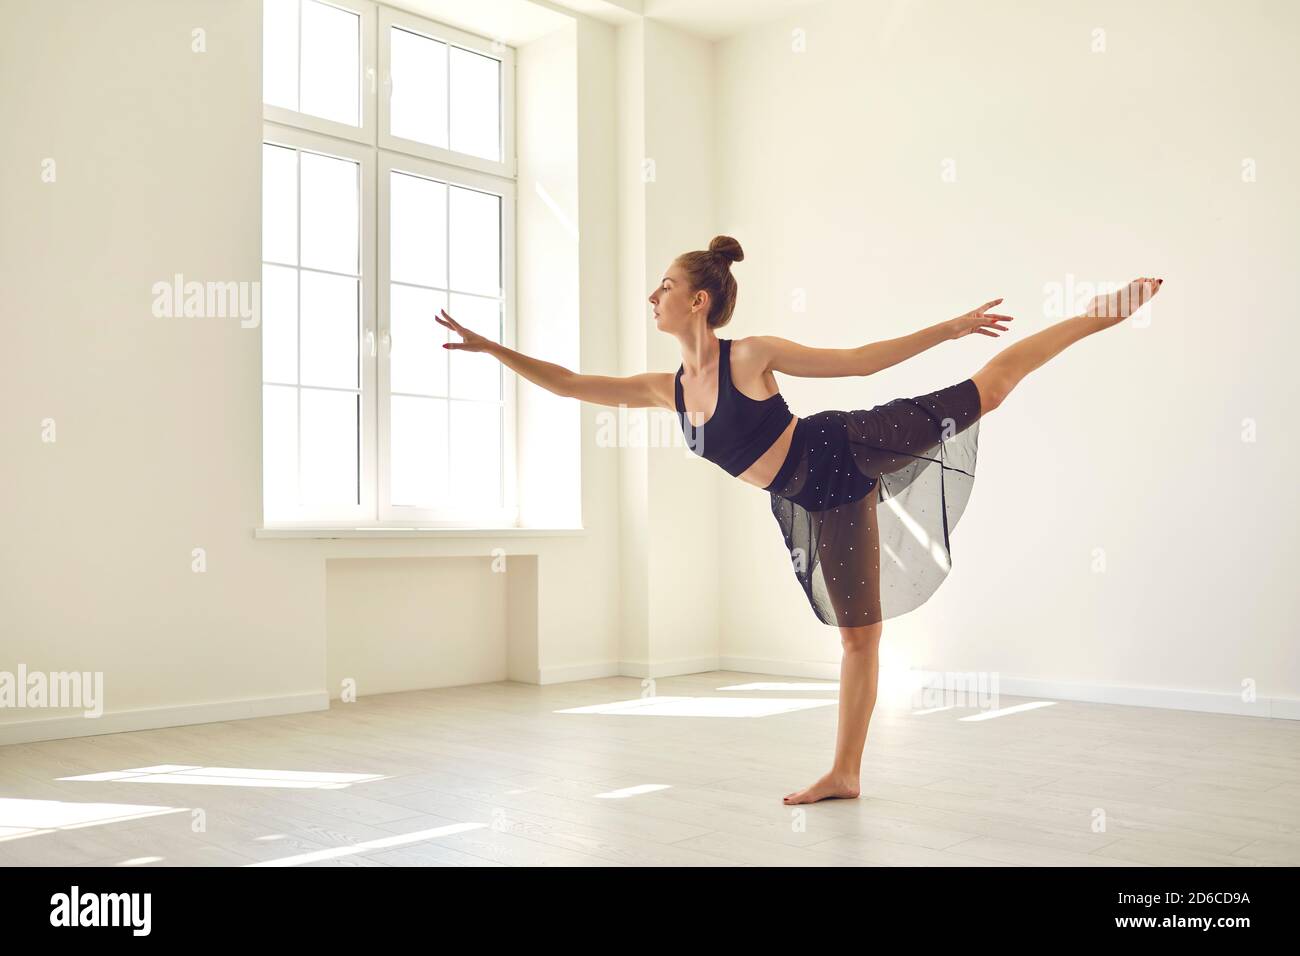 Girl standing with leg stretched out and practicing classical ballet or modern dance in studio Stock Photo